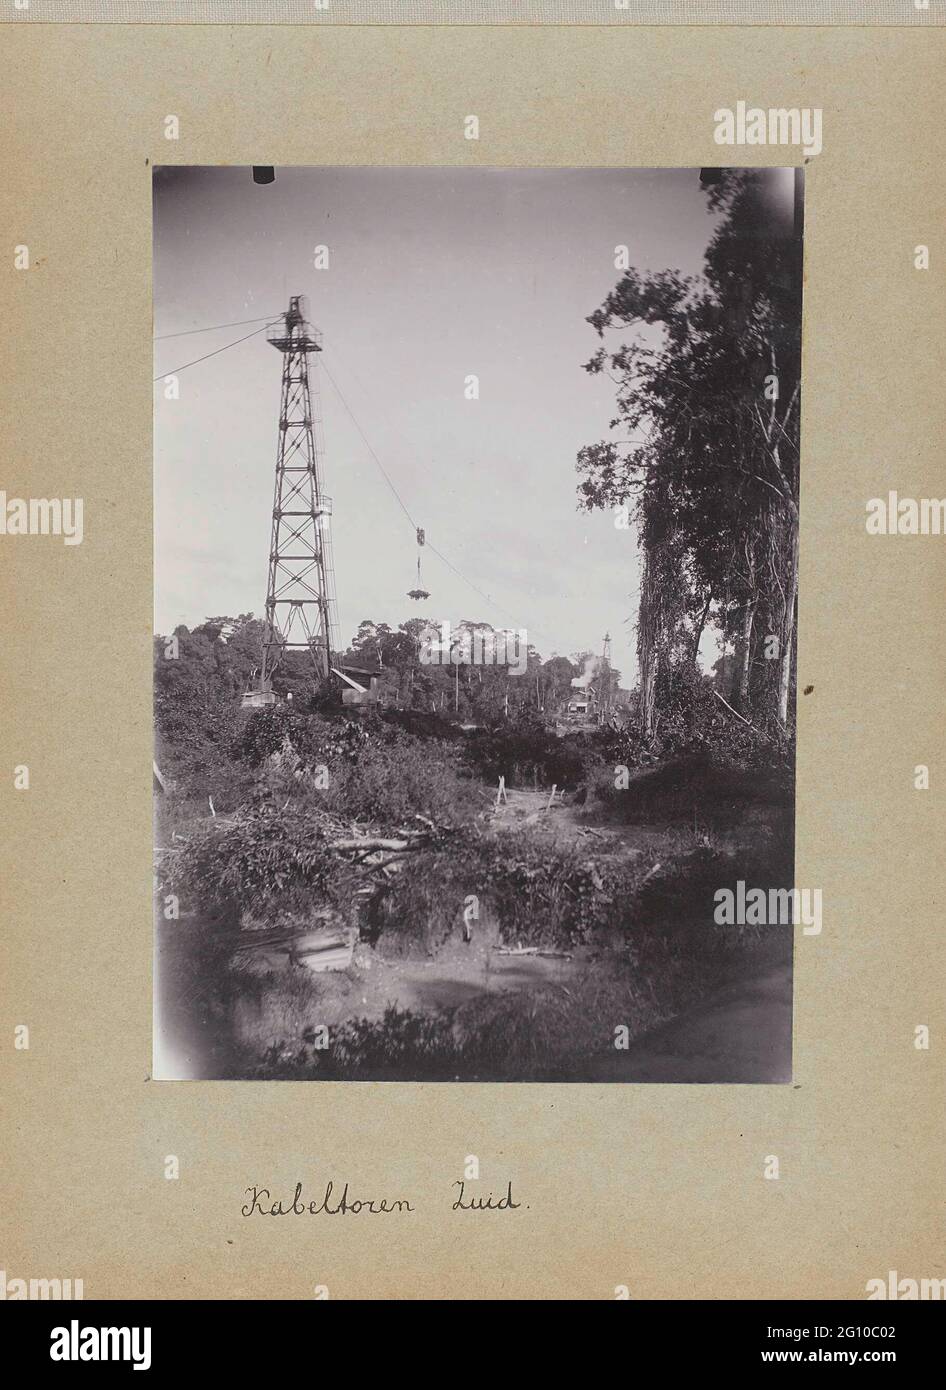 Cable tower South. The cable tower on the south side of the surinamer river. Photo in the photo album about the construction of the Lawaspoor road in Suriname in the years 1903-1912. Part of a group of objects from the Wesenhagen family in Suriname. Stock Photo